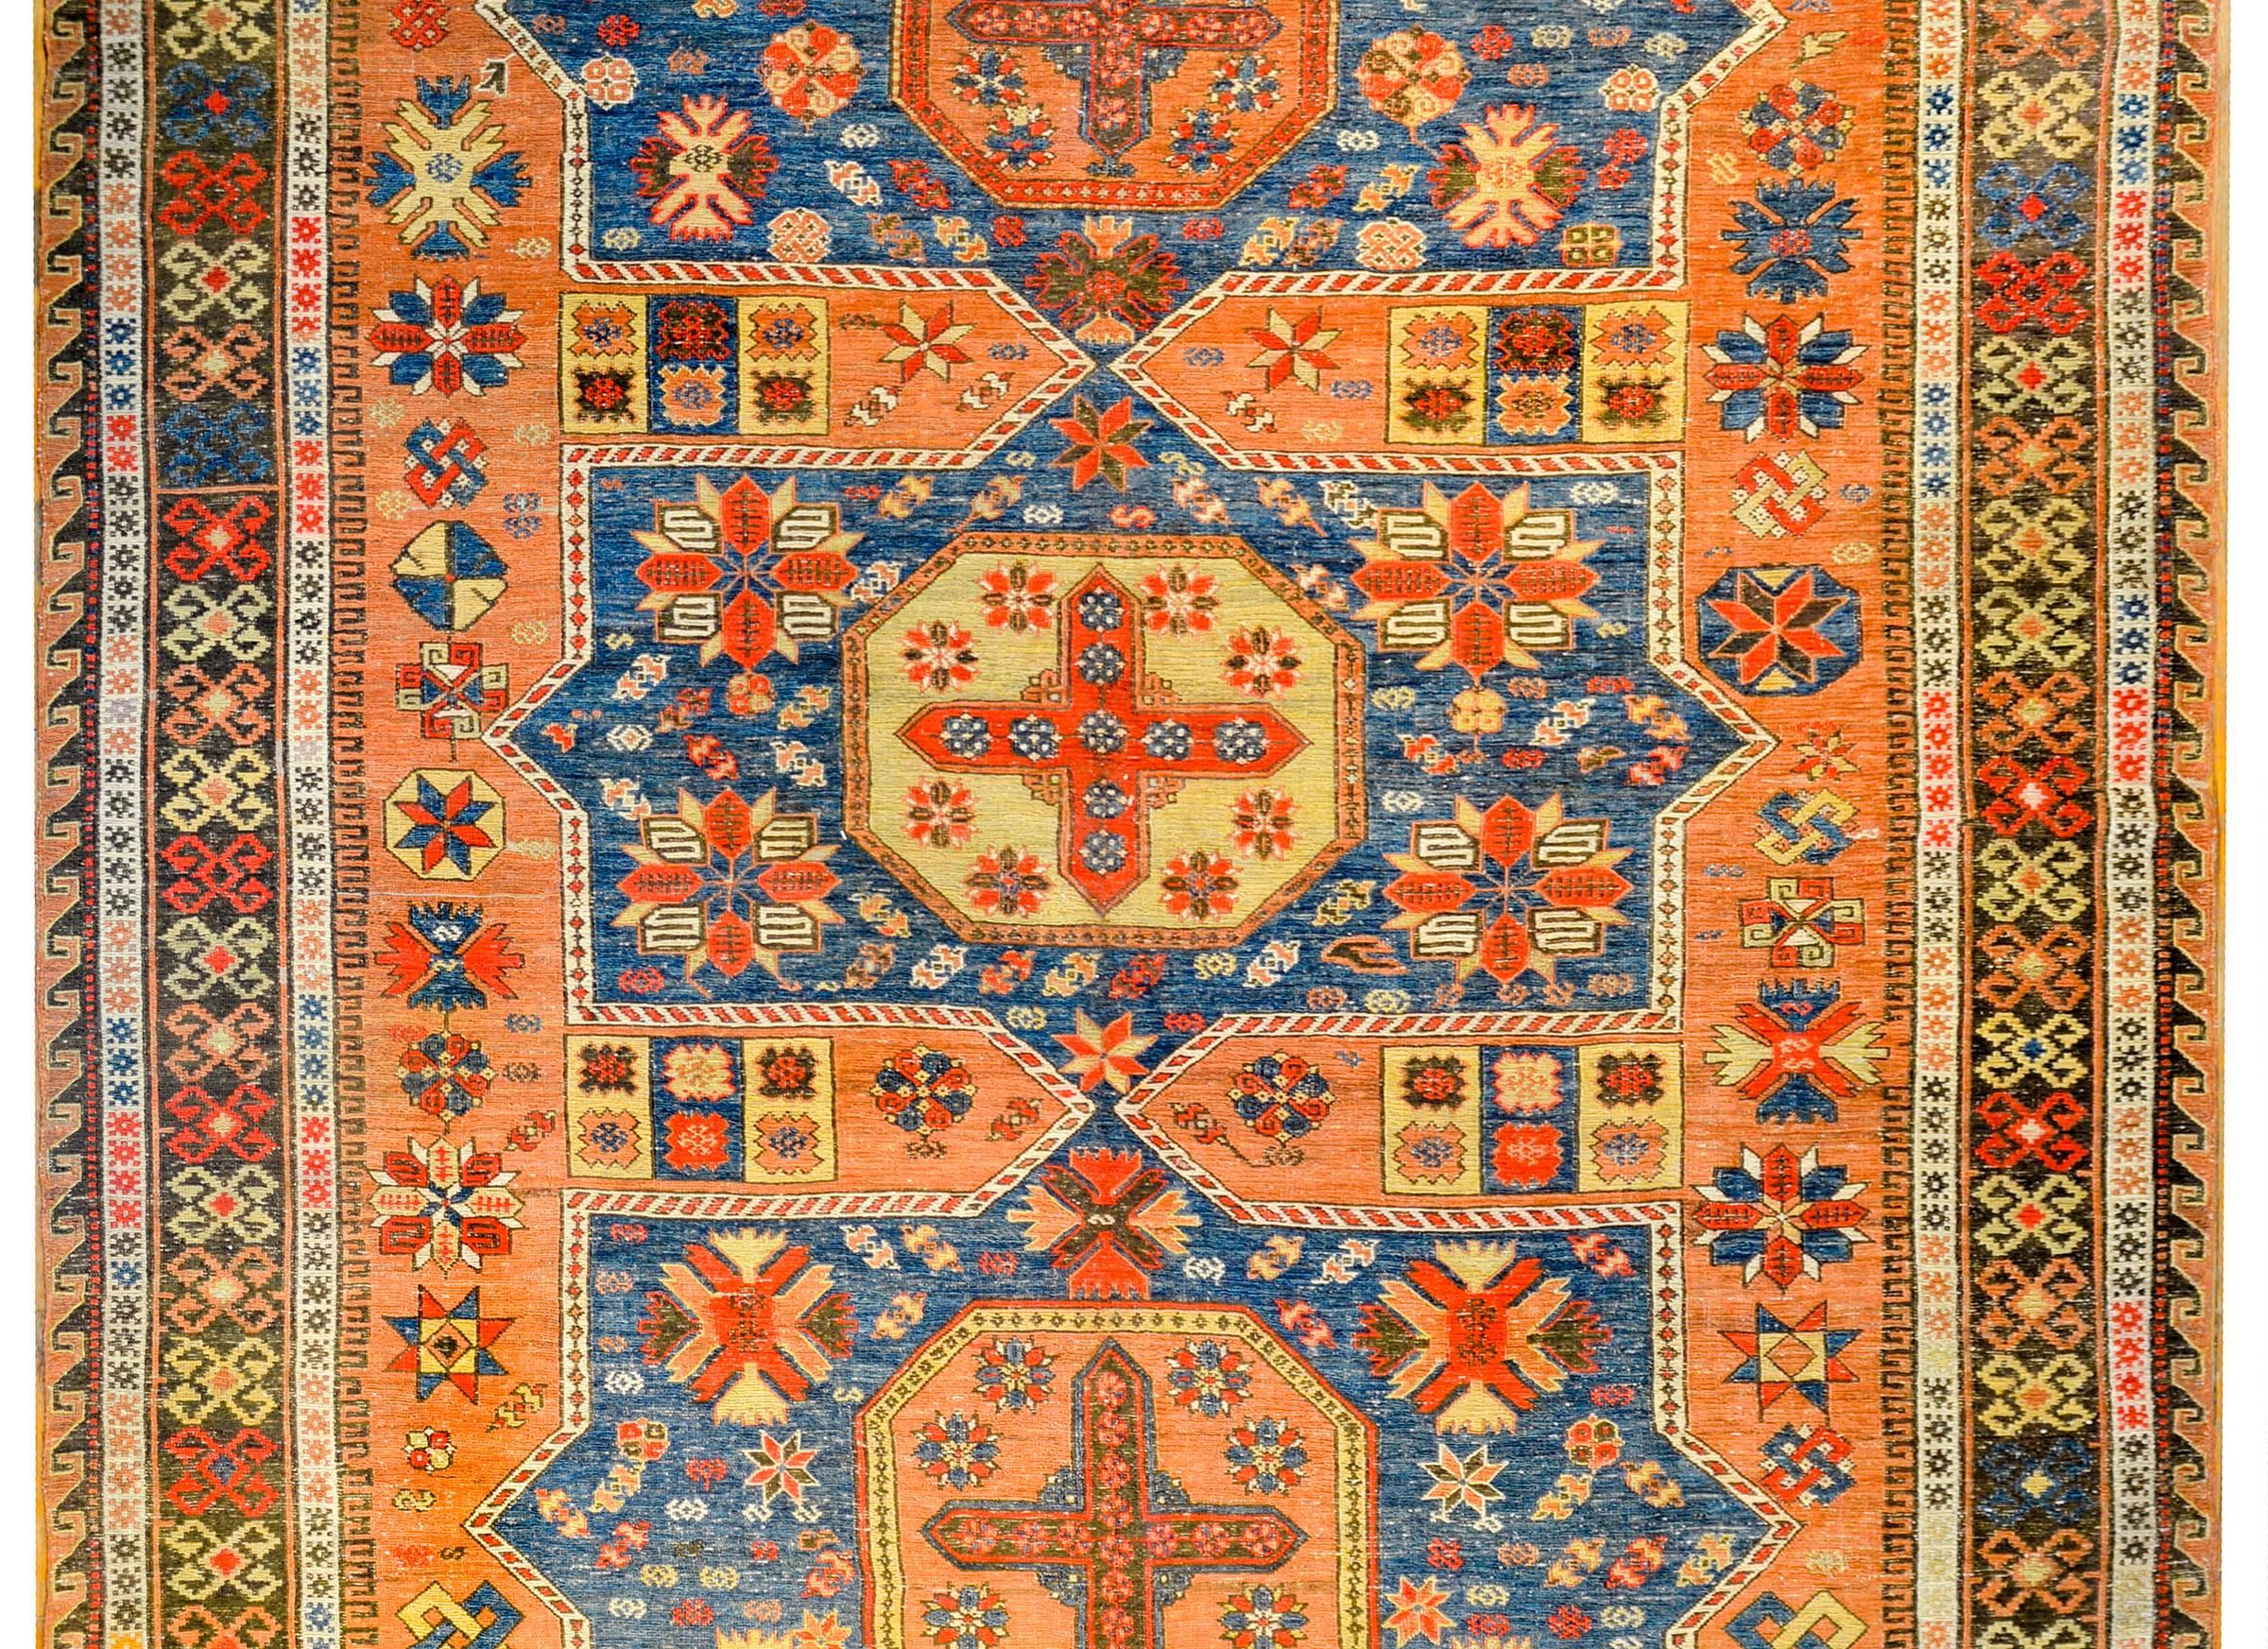 An unbelievable early 20th century Persian Sumak rug with three large octagonal medallions, densely woven with stylized geometric and floral motifs, amidst a field of stylized flowers on an indigo background. The border is masterfully woven with a